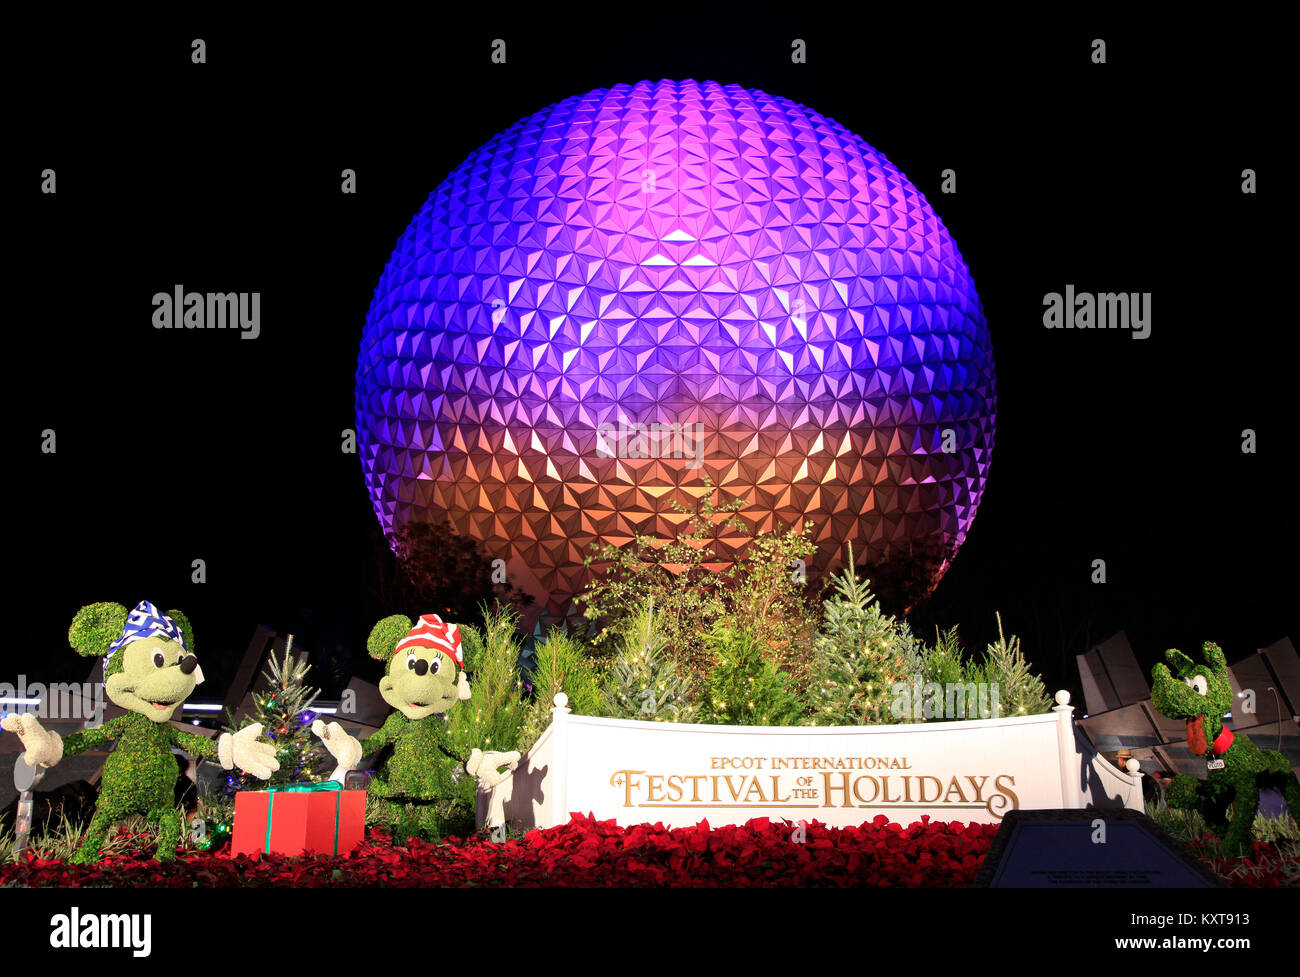 Disney's EPCOT Center sphere illuminated at night during Holidays Season with Mickey Mouse, Minnie and Pluto characters grass sculptures . Stock Photo